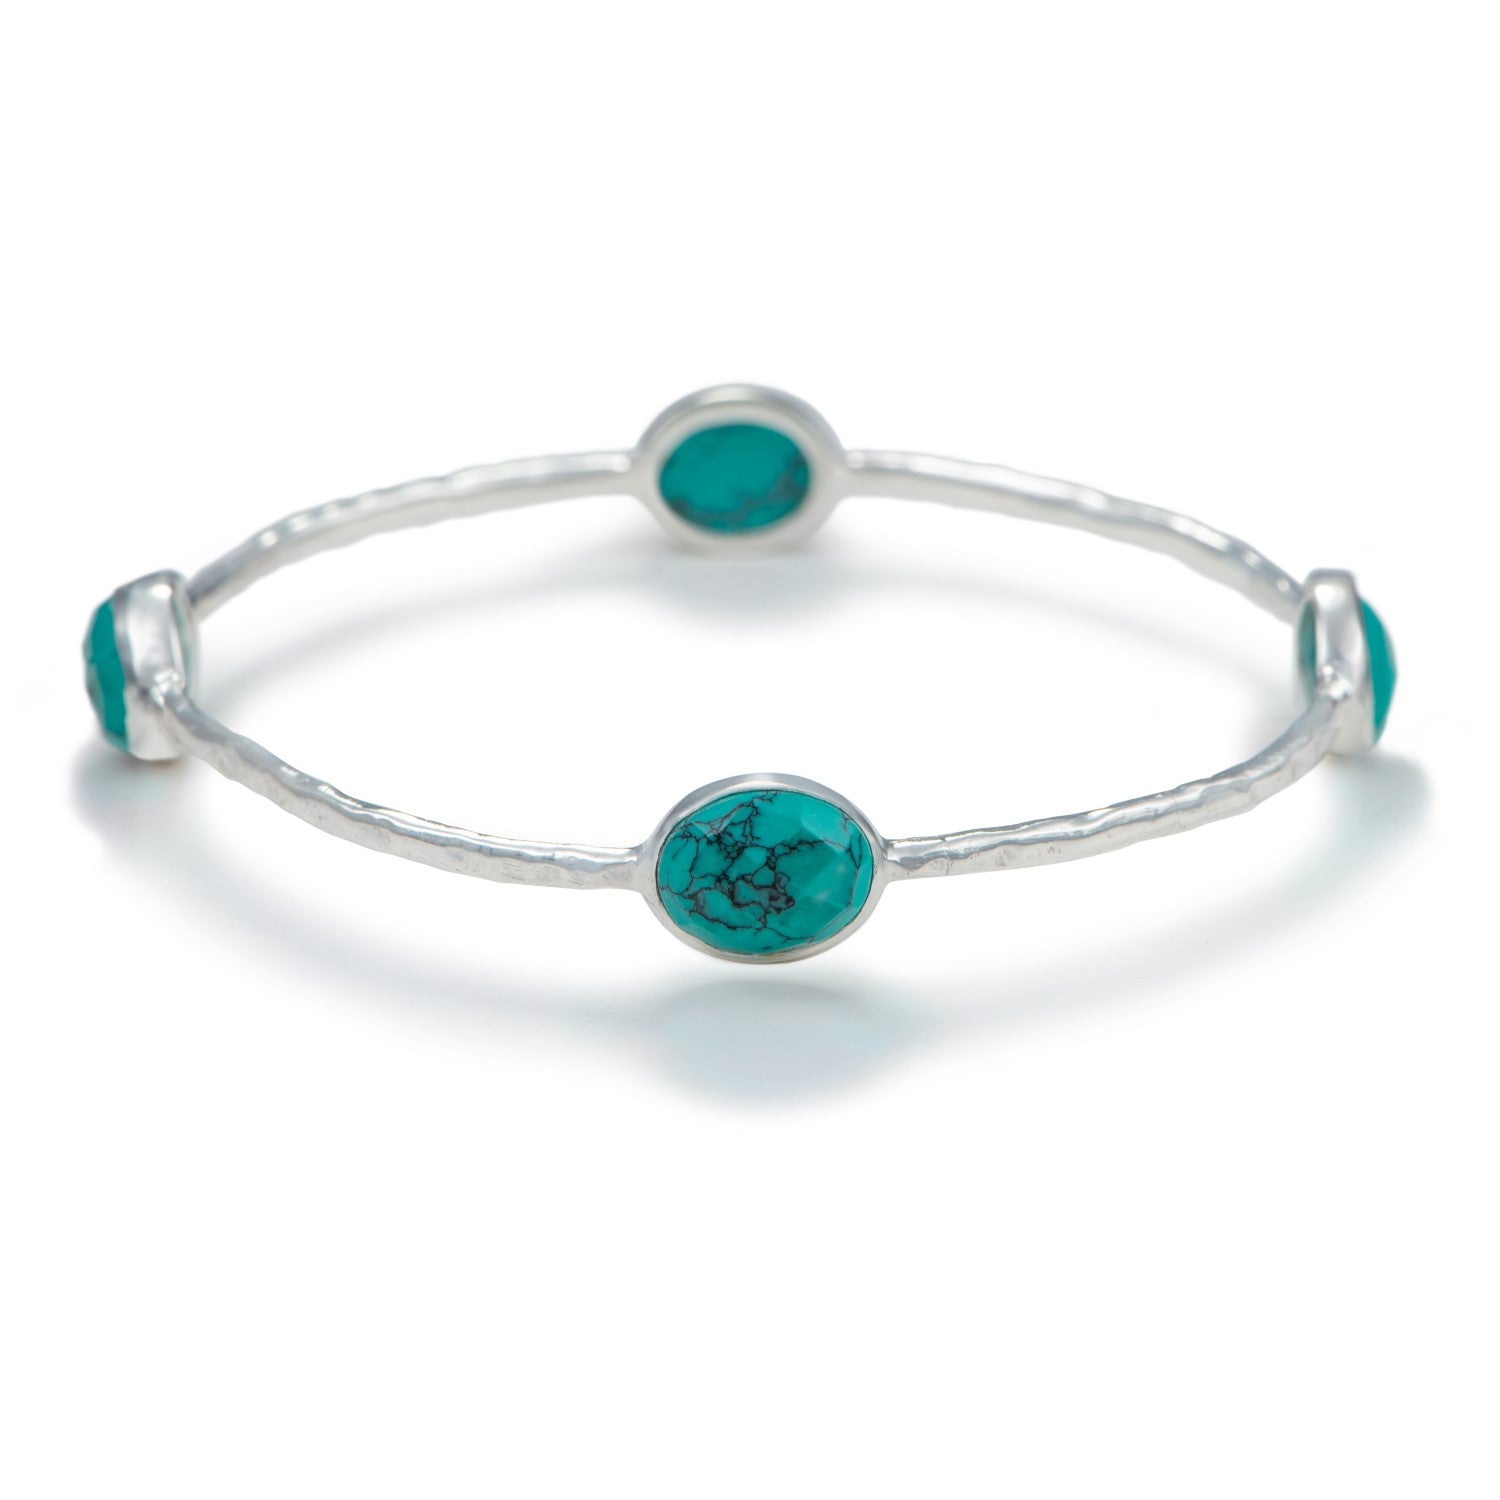 Turquoise Gemstone Bangle in Sterling Silver